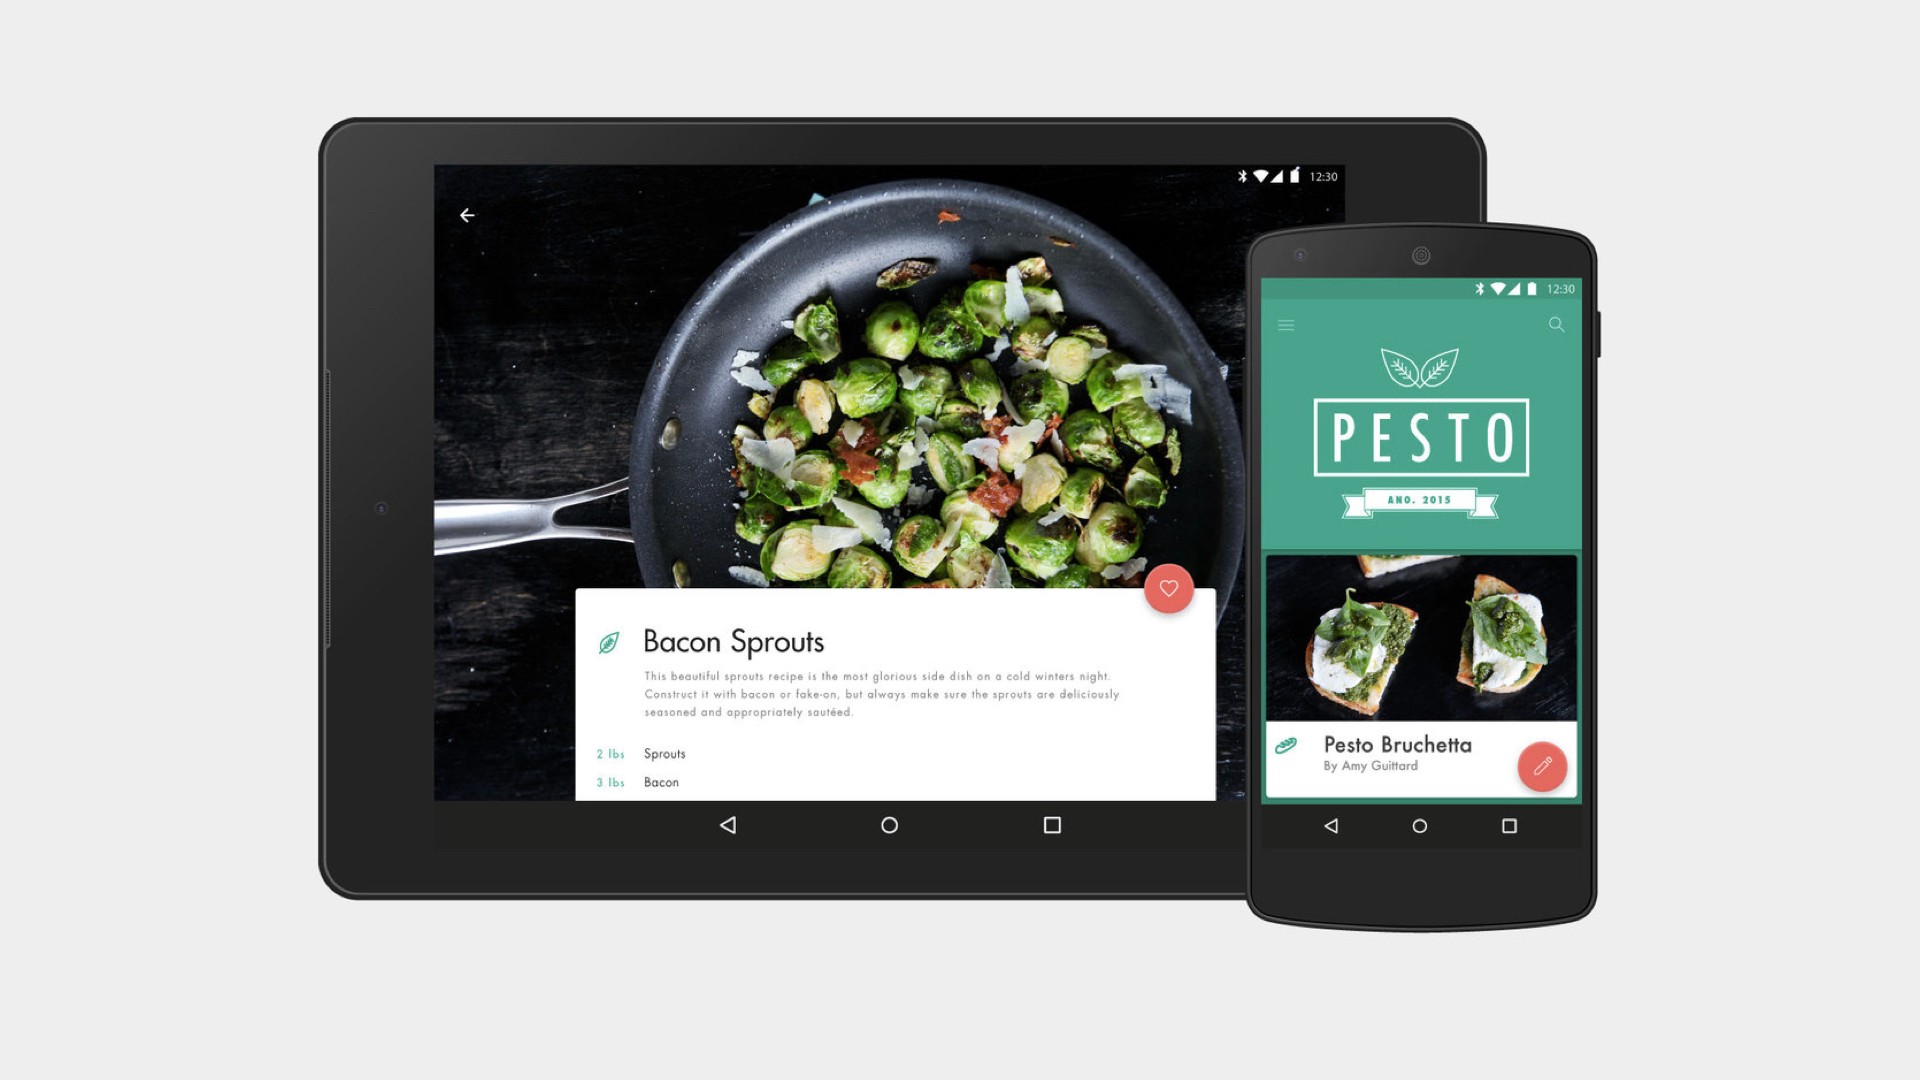 Phone and tablet views for recipe app that looks like Material Design's identity.